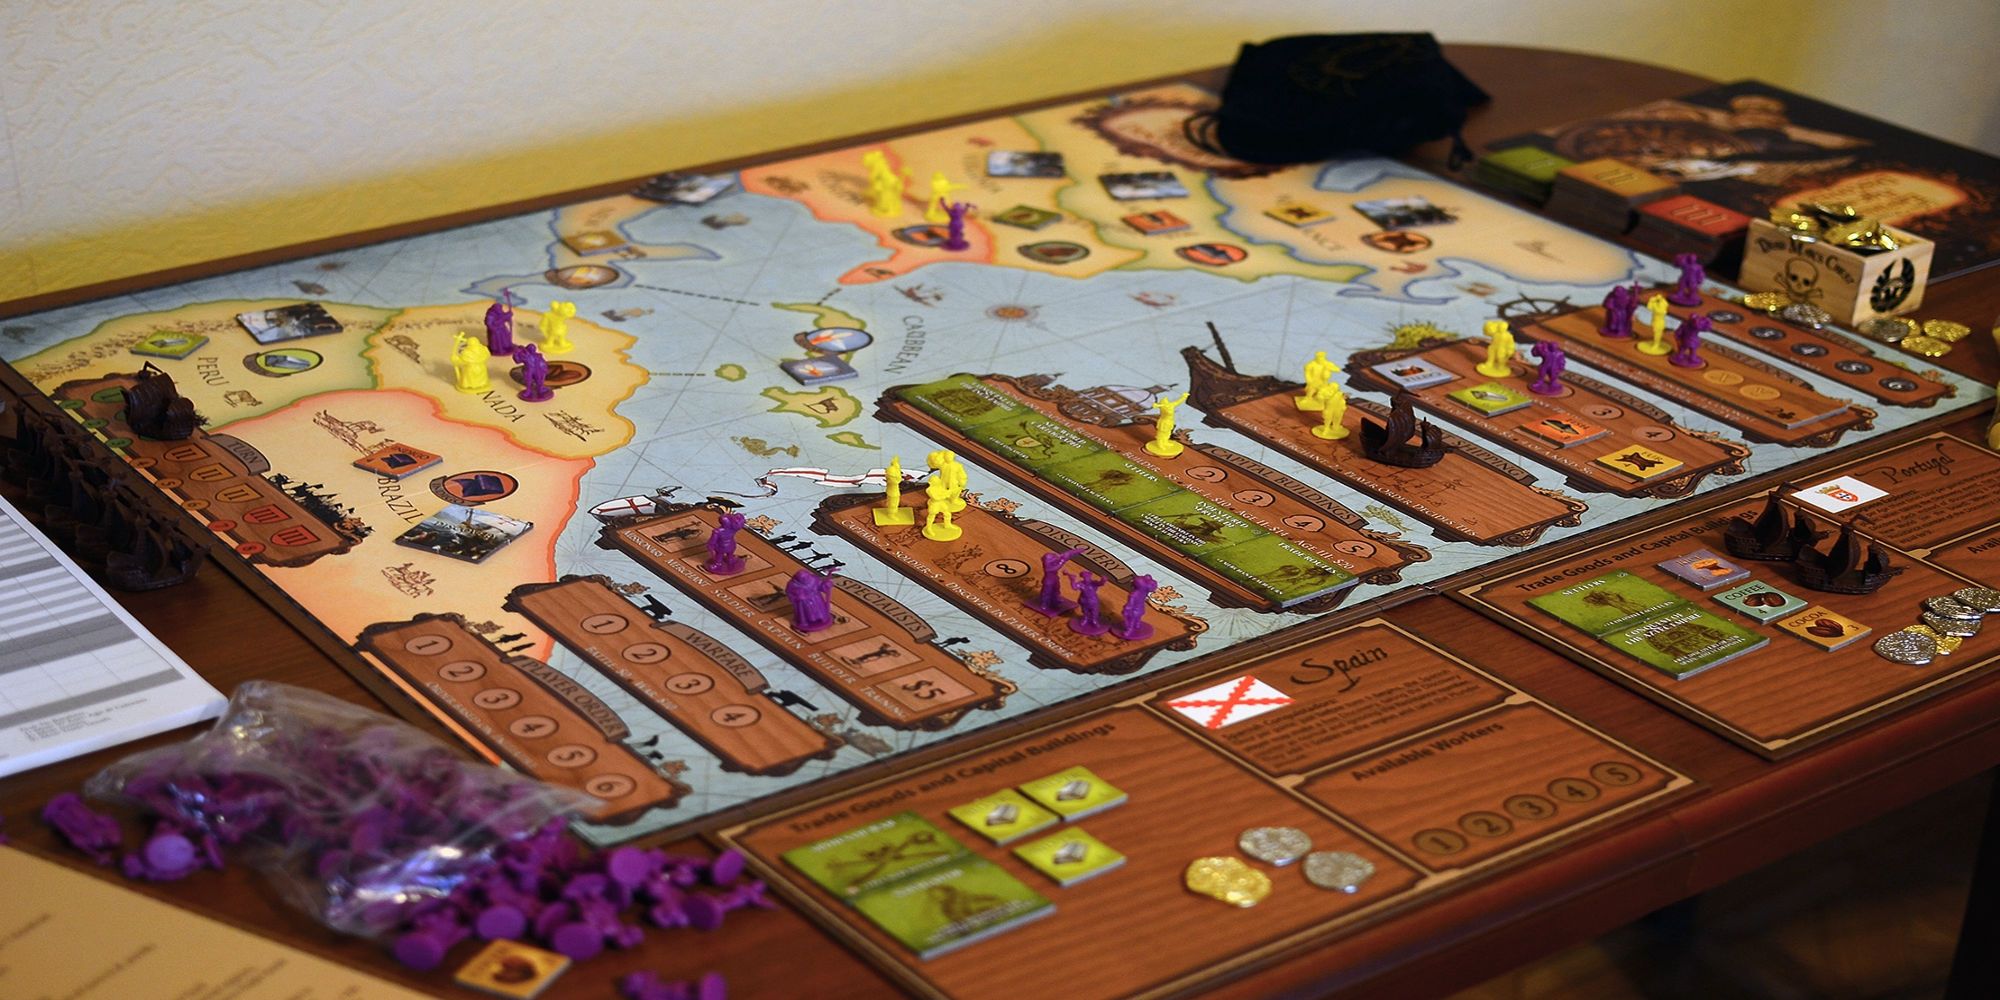 The Age of Empires board game displaying the Americas with purple and yellow figures placed on it